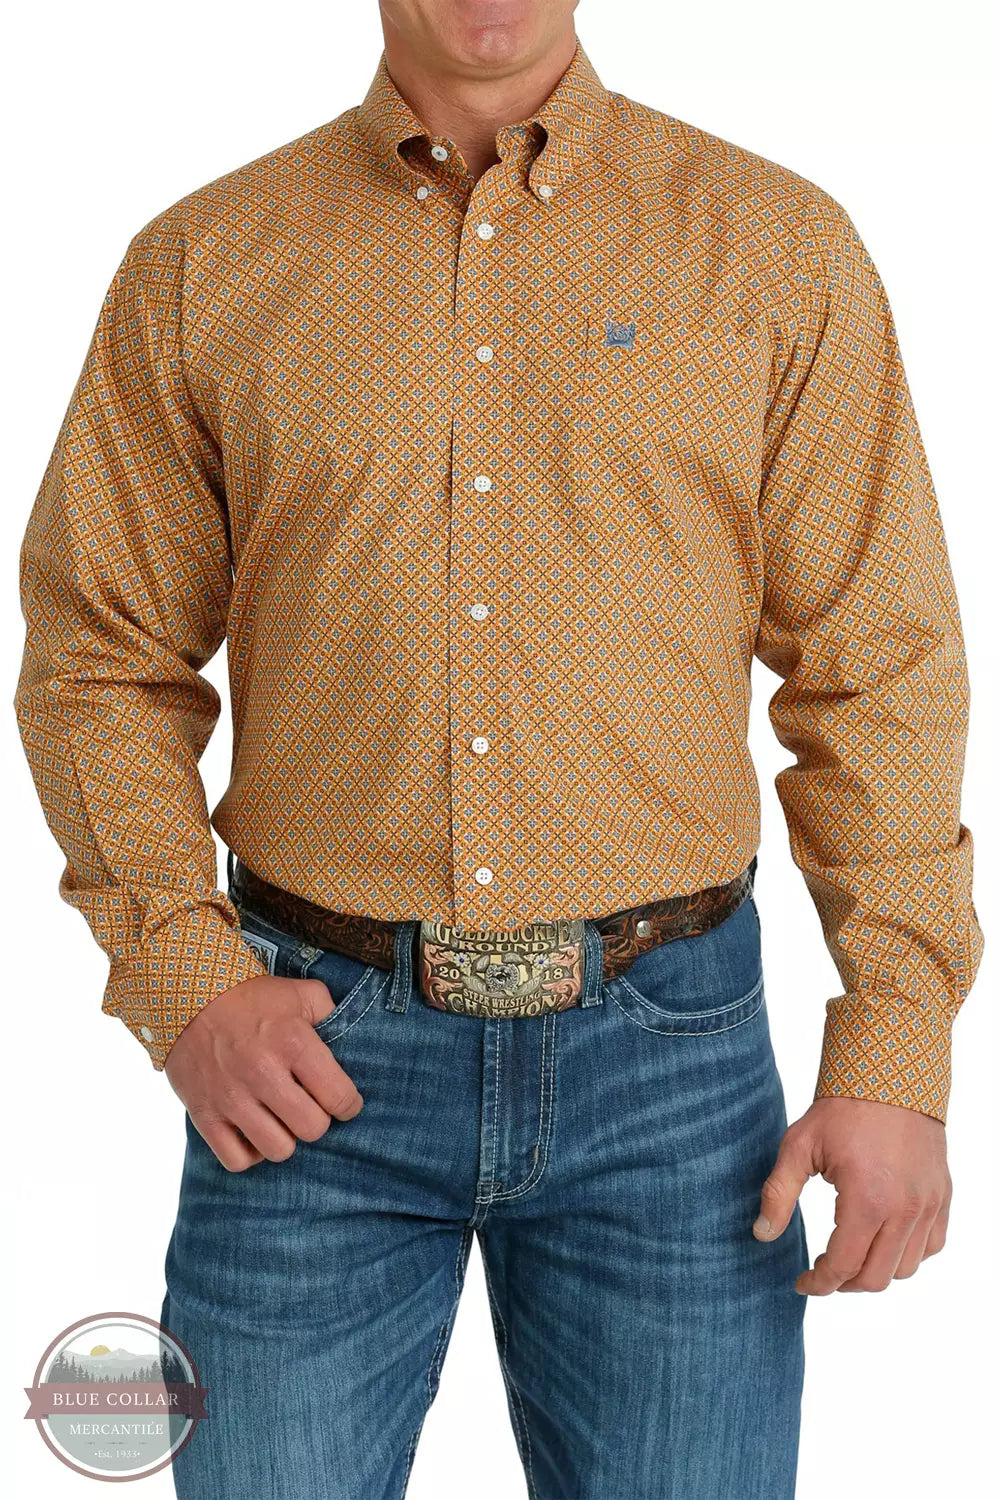 Cinch MTW1105700 Geometric Print Button-Down Western Long Sleeve Shirt in Orange/Blue Front View